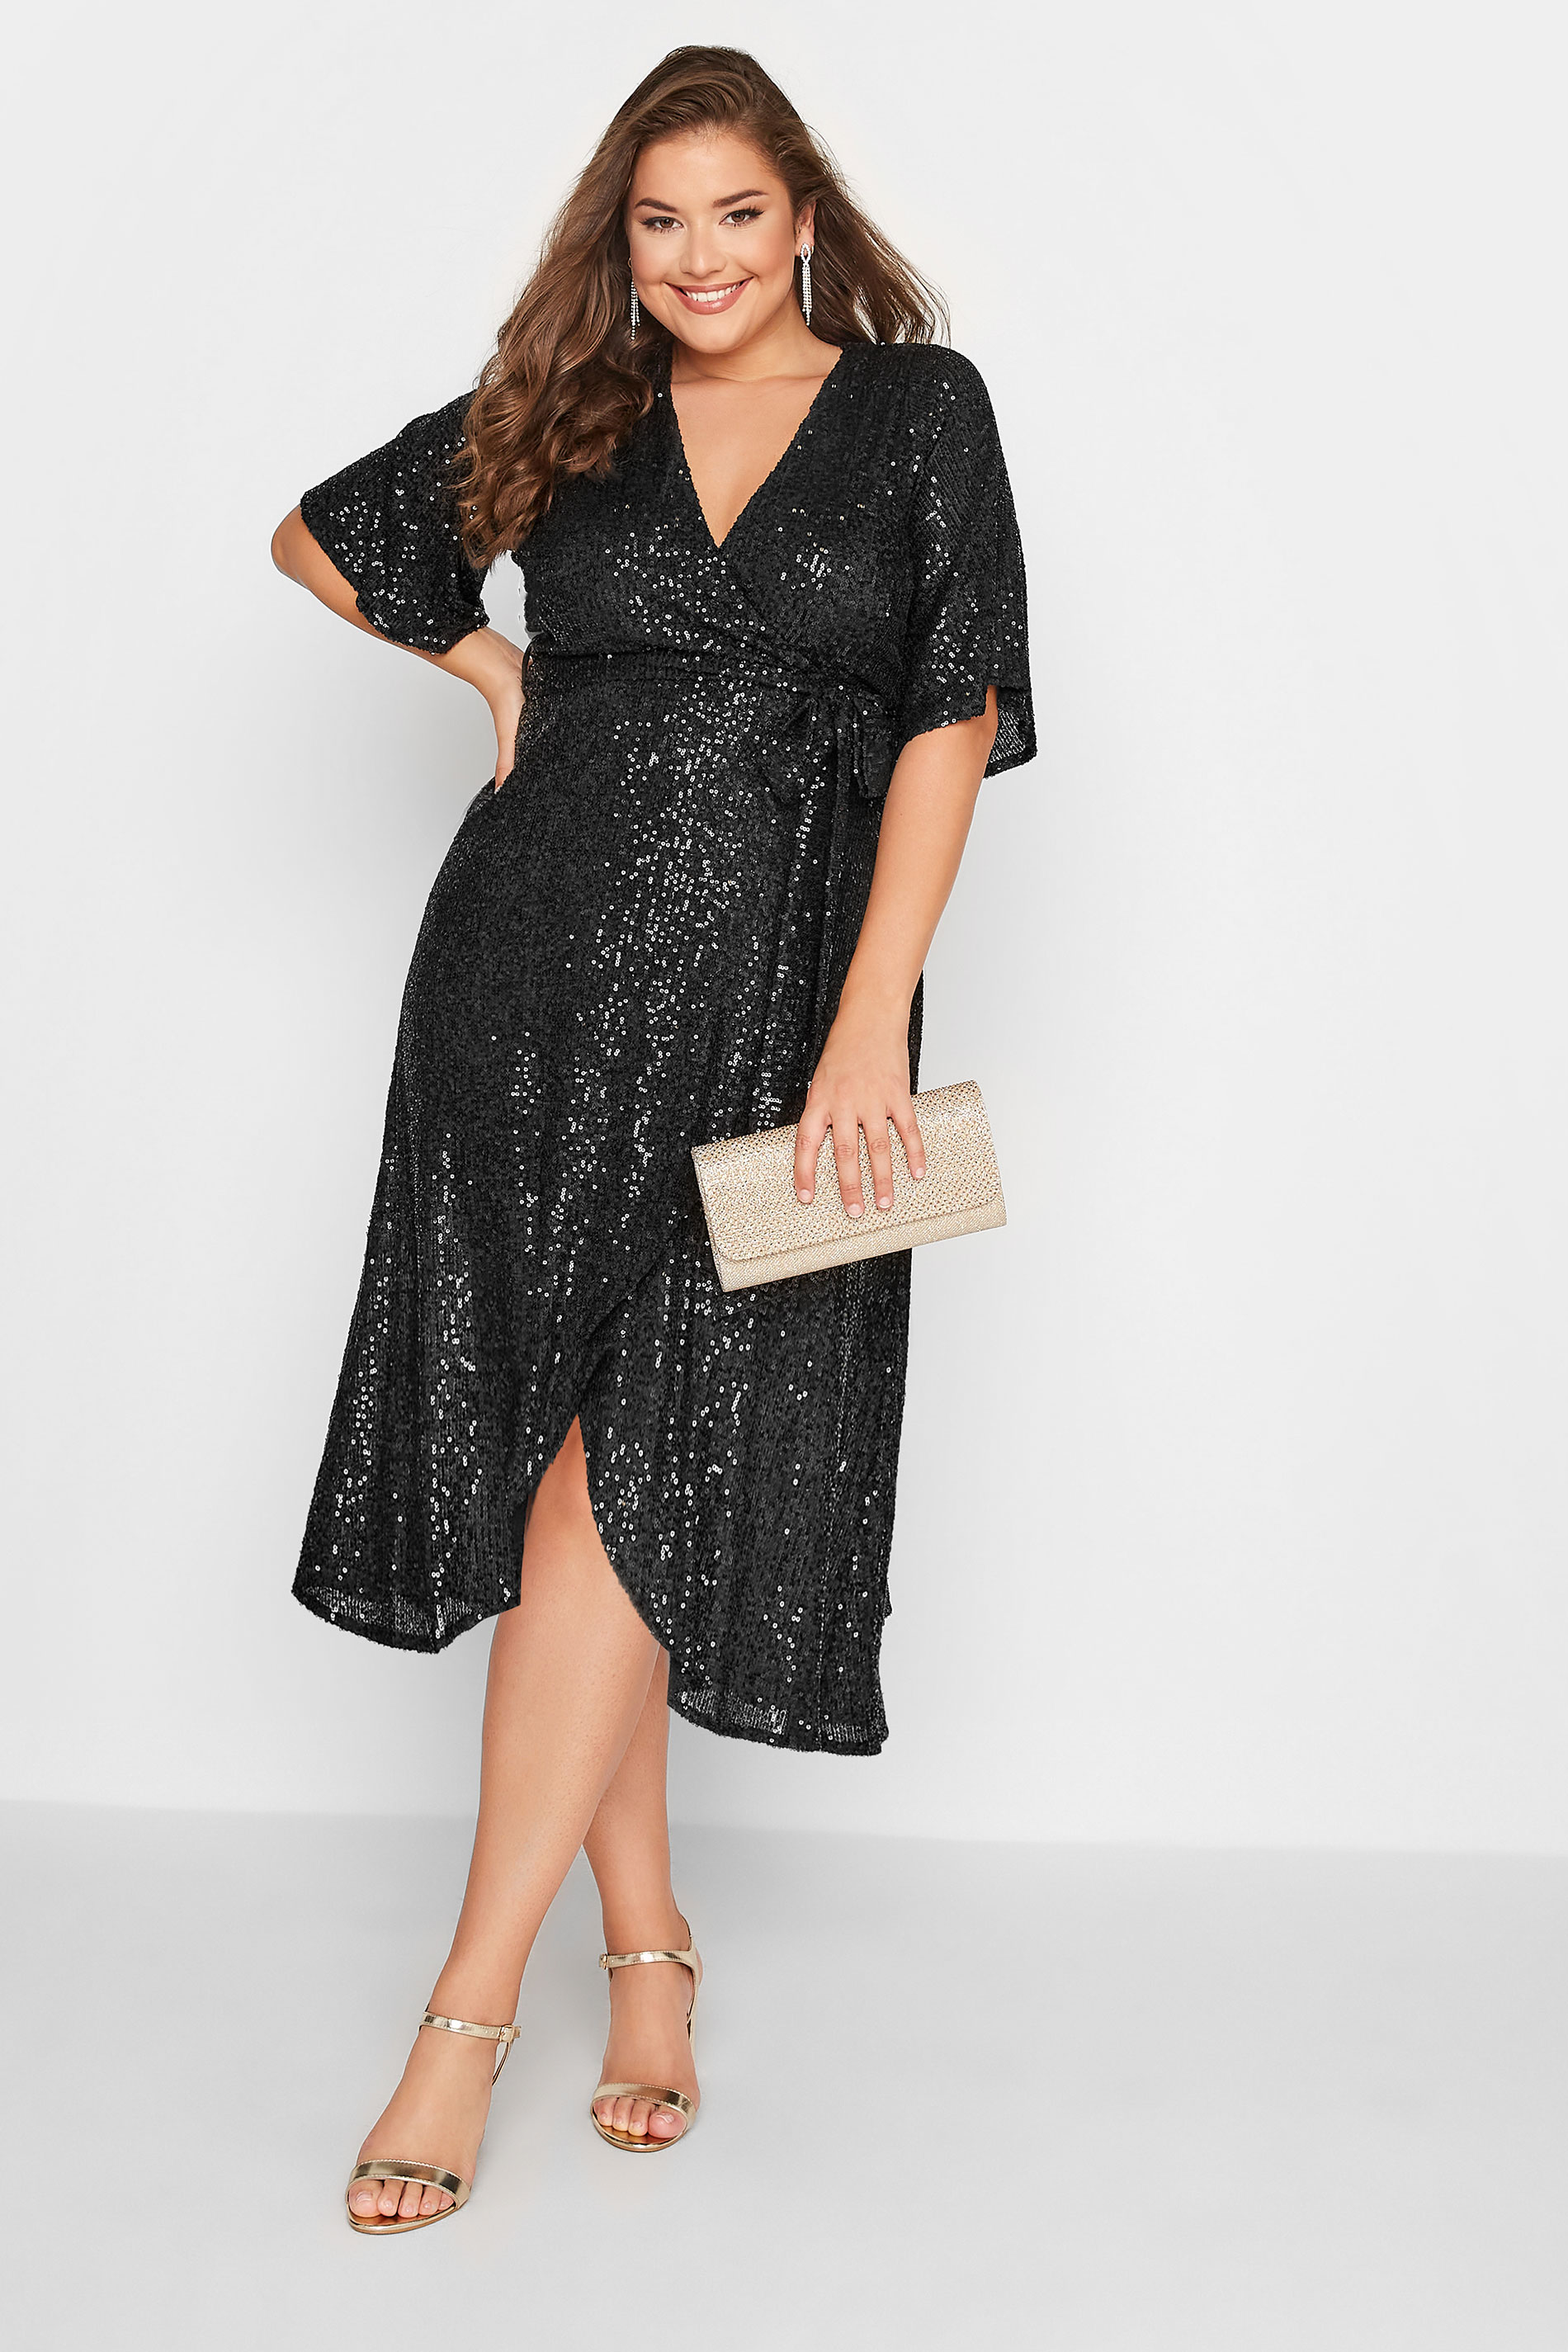 YOURS LONDON Plus Size Black Sequin Embellished Double Wrap Dress | Yours Clothing 1